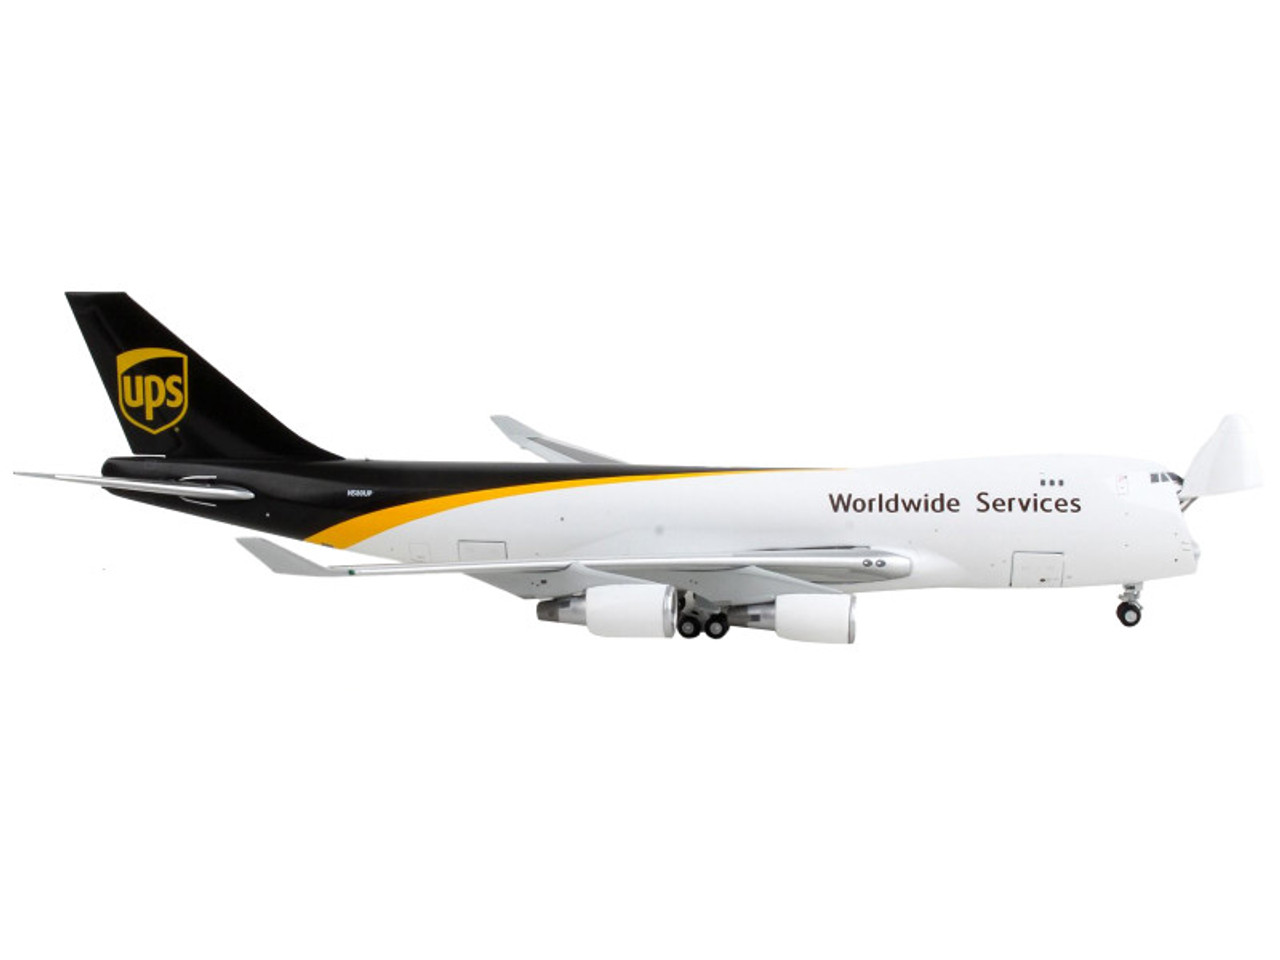 Boeing 747-400F Commercial Aircraft "UPS Worldwide Service" White and Brown "Interactive Series" 1/400 Diecast Model Airplane by GeminiJets